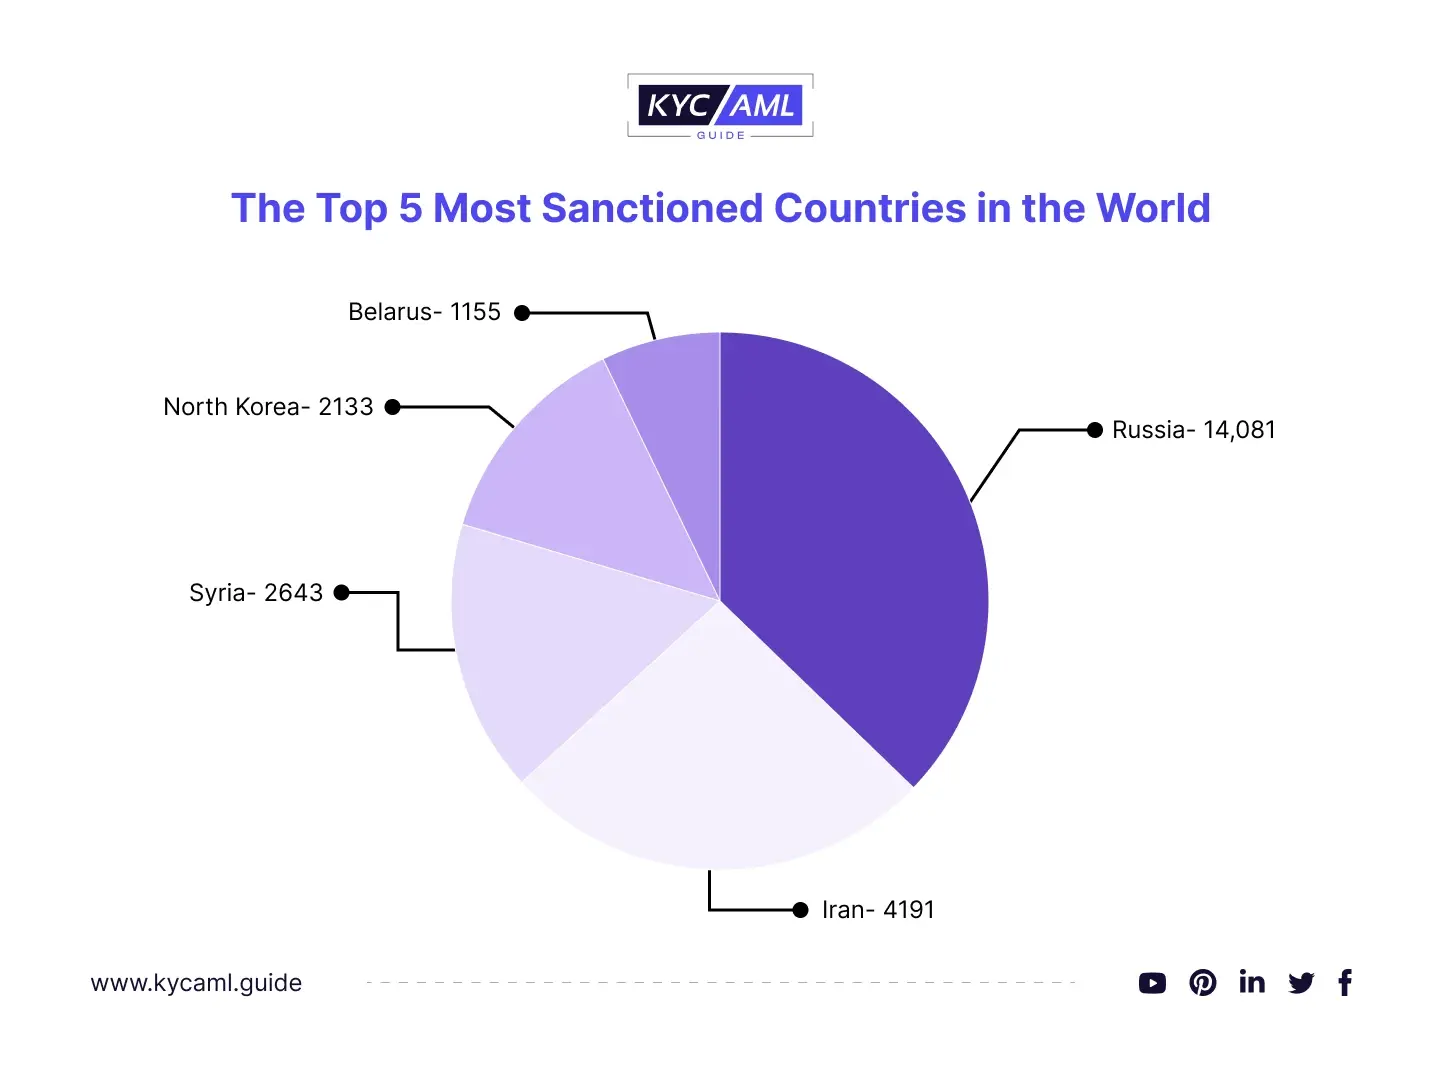 The Top 5 Most Sanctioned Countries in the World